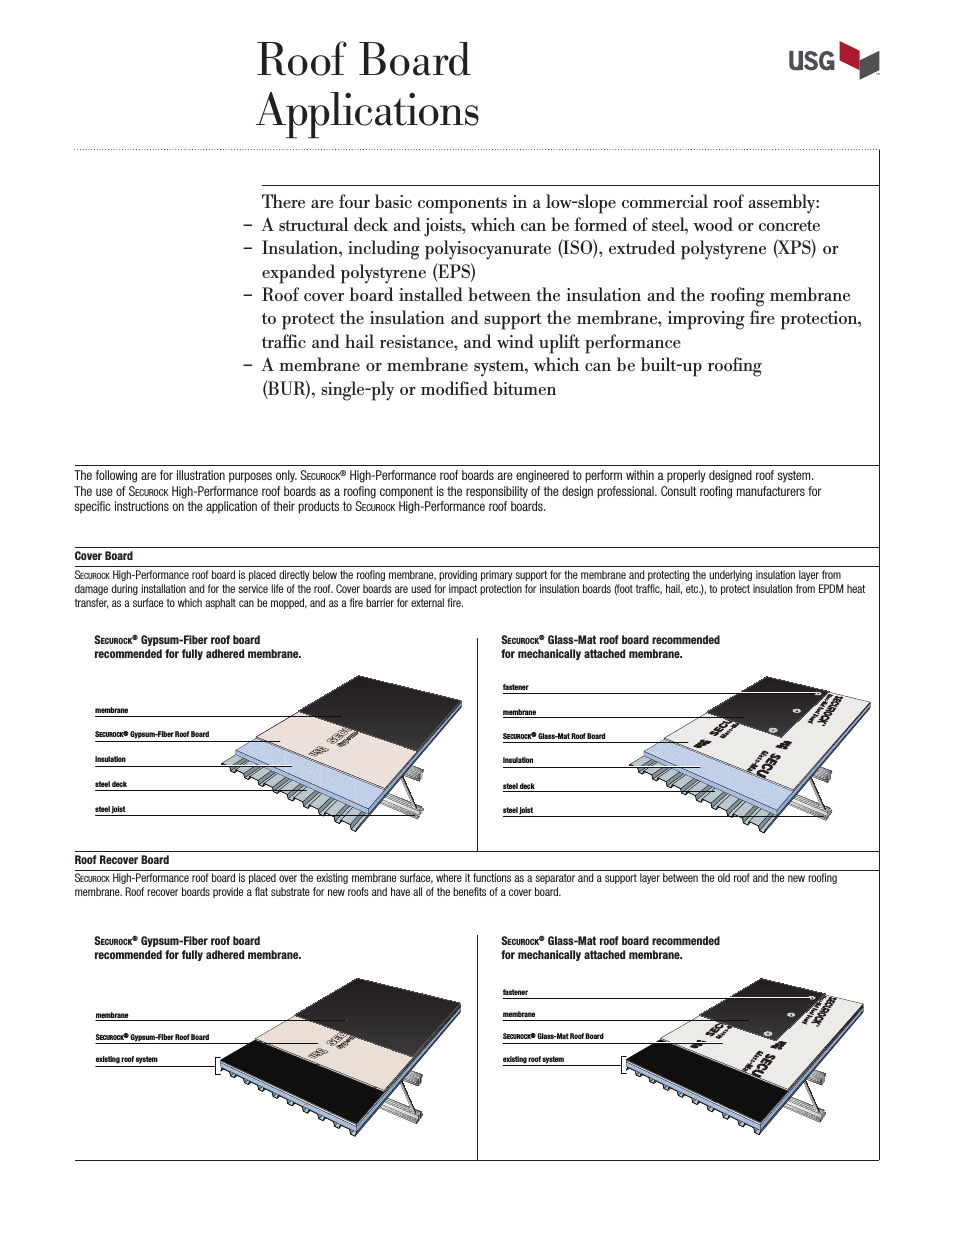 Roof Board Applications